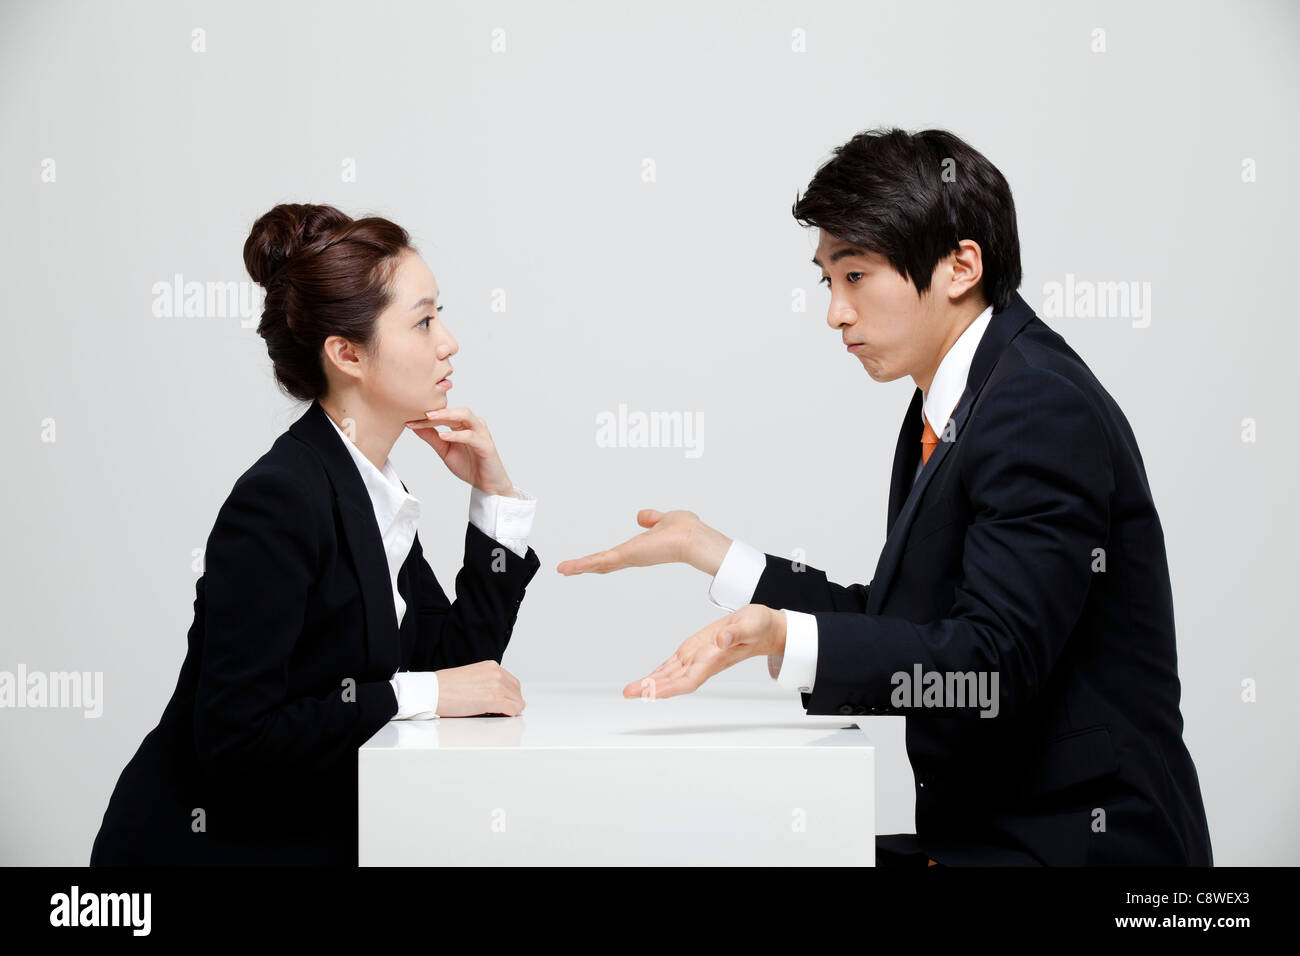 Asian Businesswoman And Businessman Having A Face To Face Discussion Stock Photo Alamy